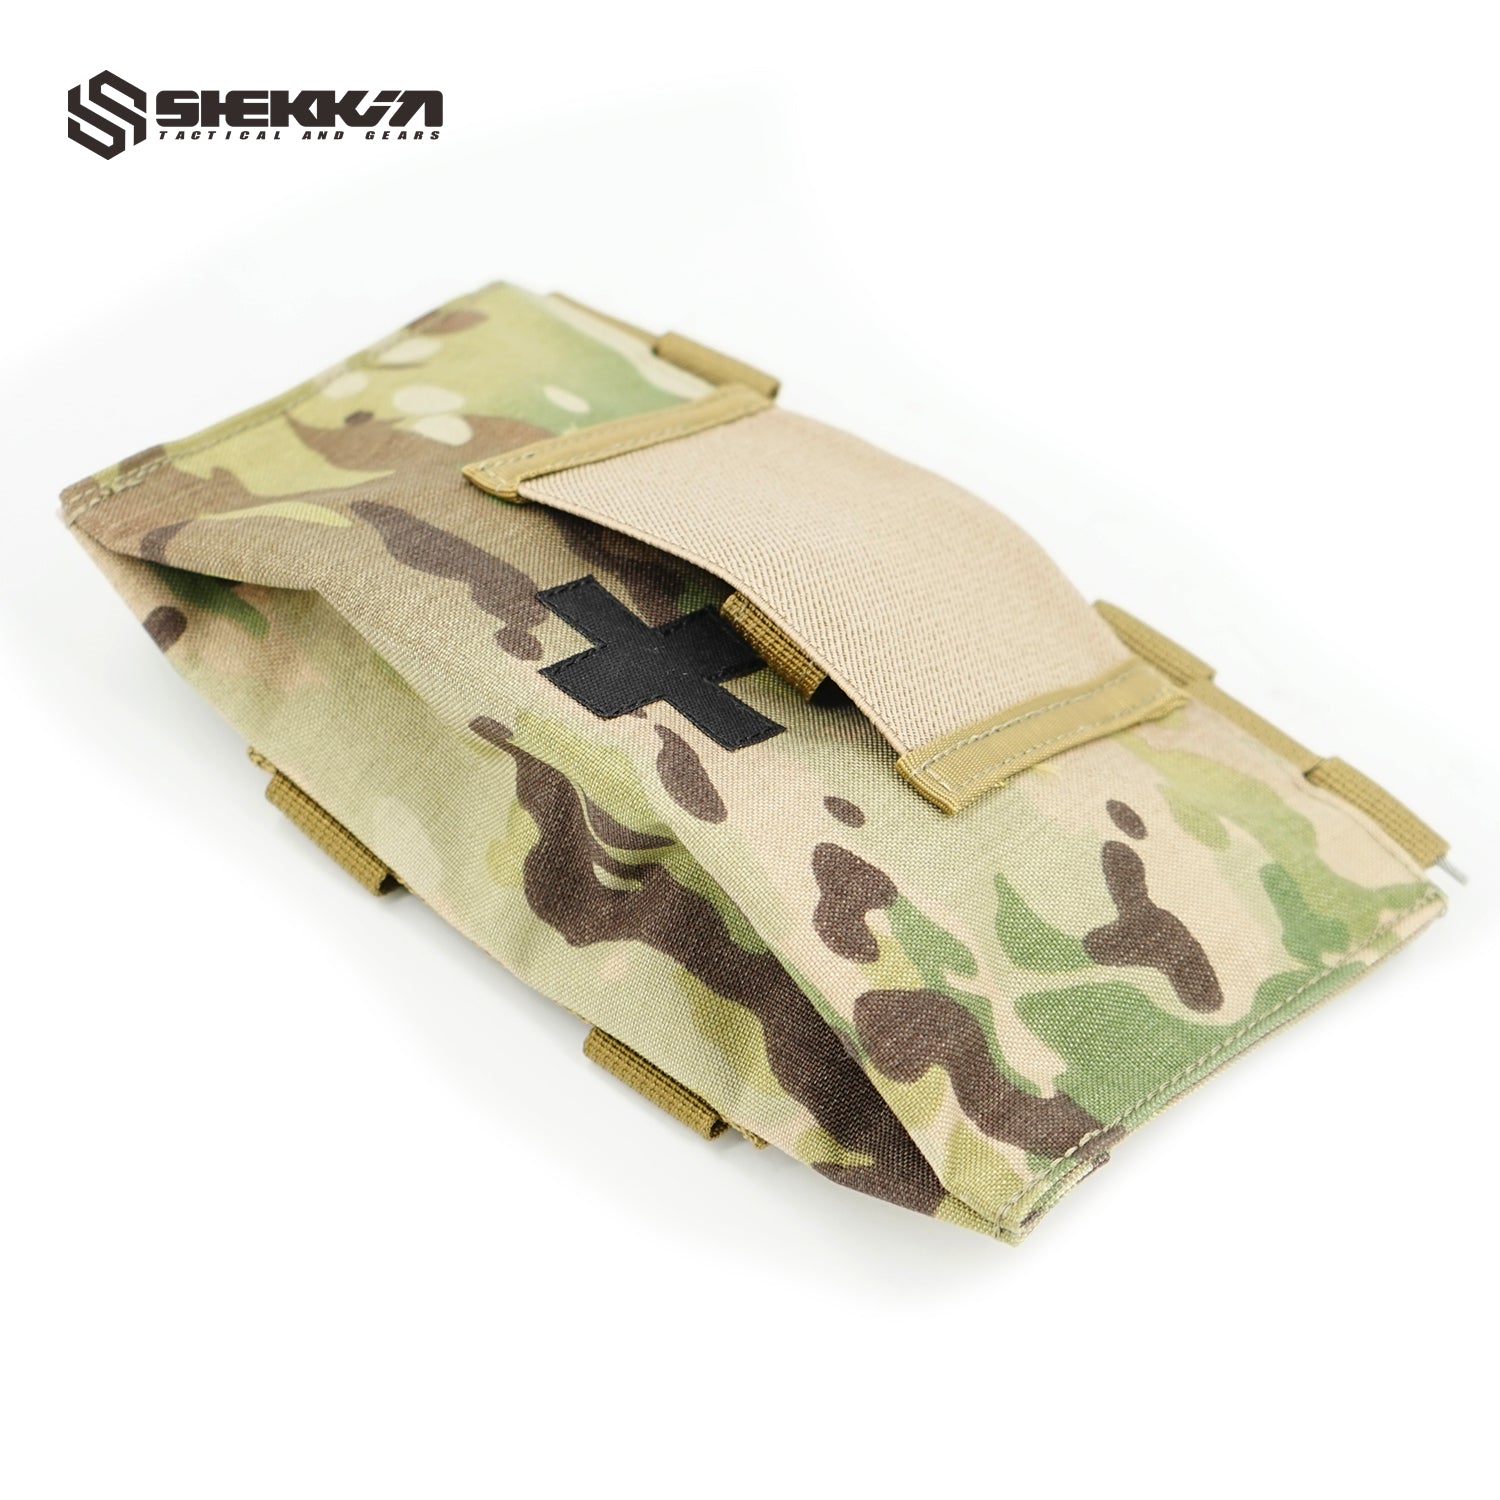 9022 Style Medic Pouch A CAG Gears